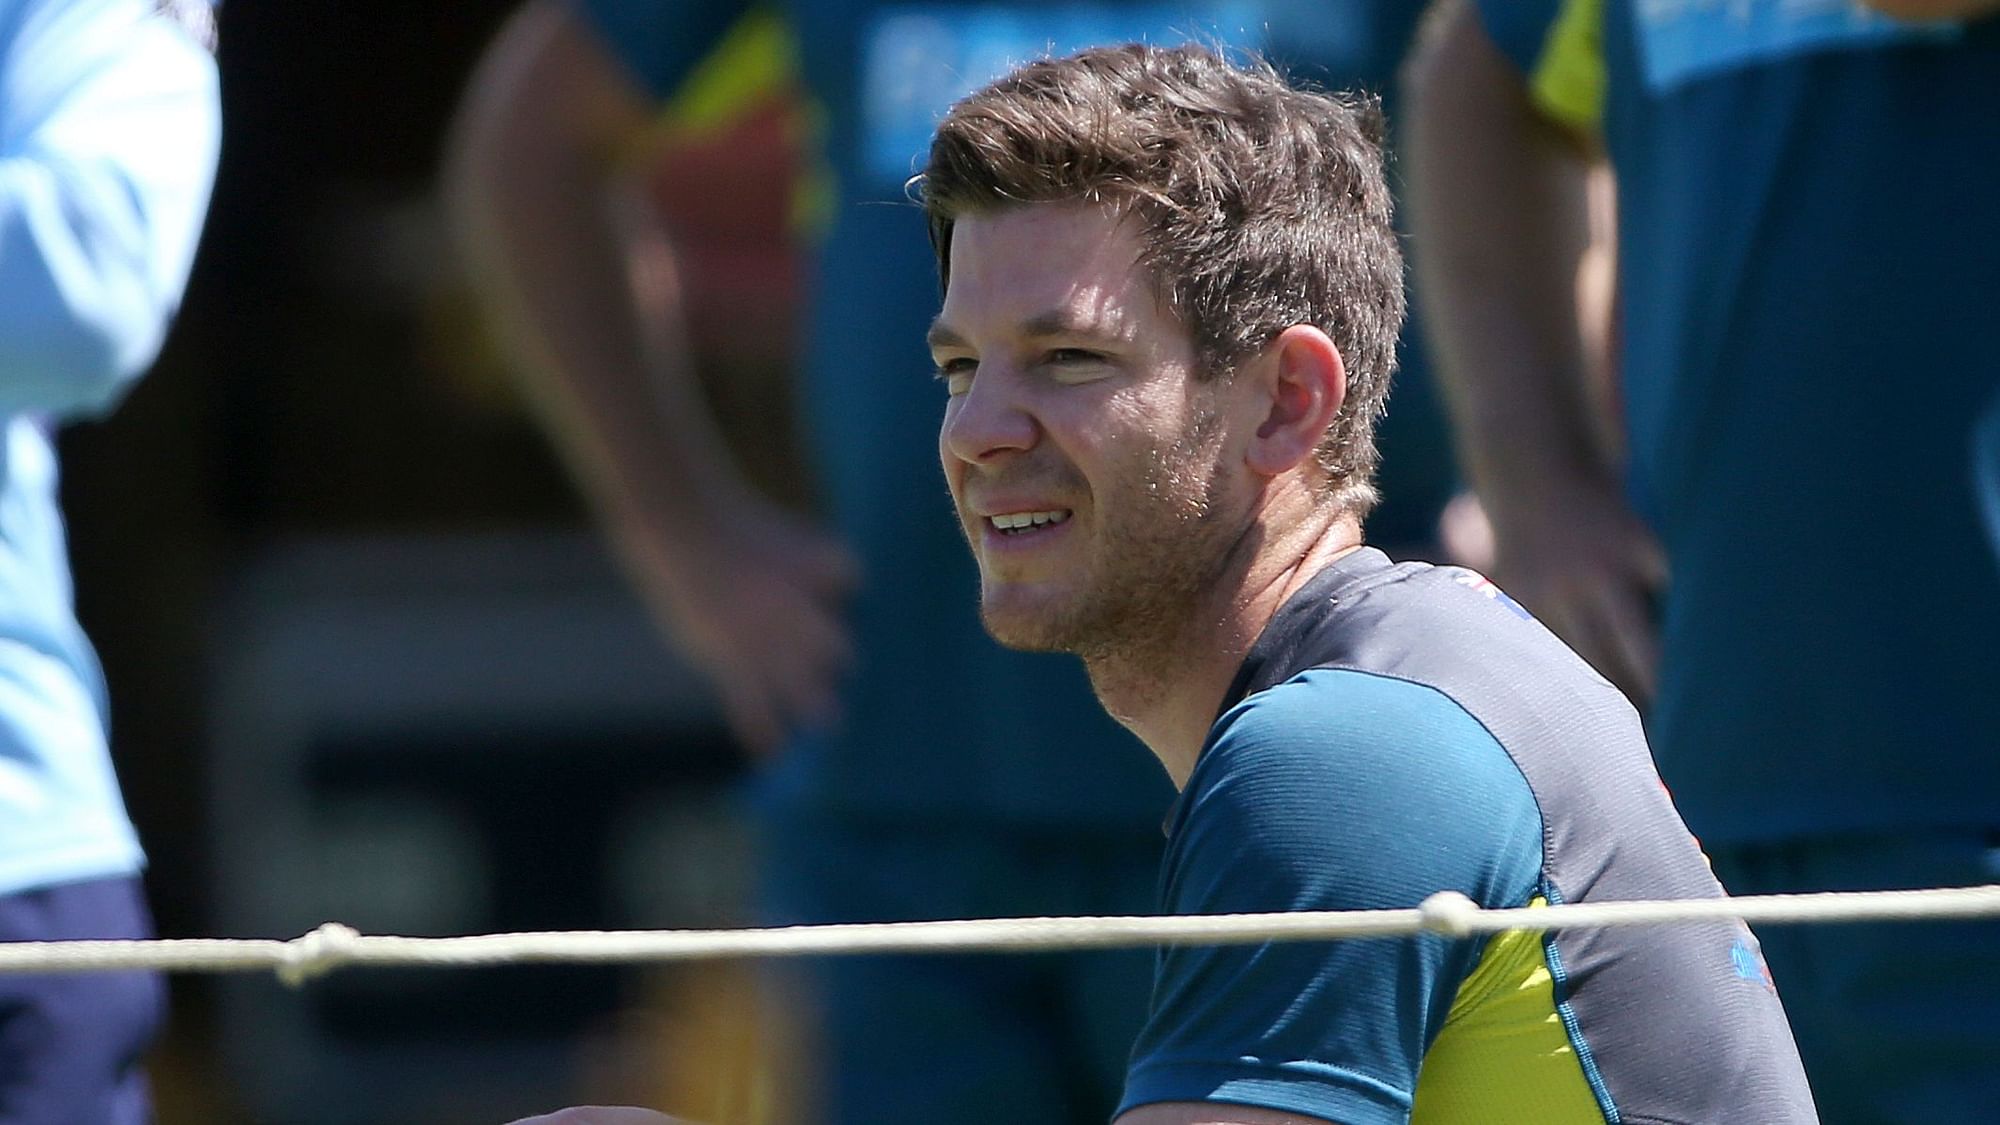 Australian skipper Tim Paine said his “work-in-progress” team is unfazed by the prospect of losing a home Test series to India.